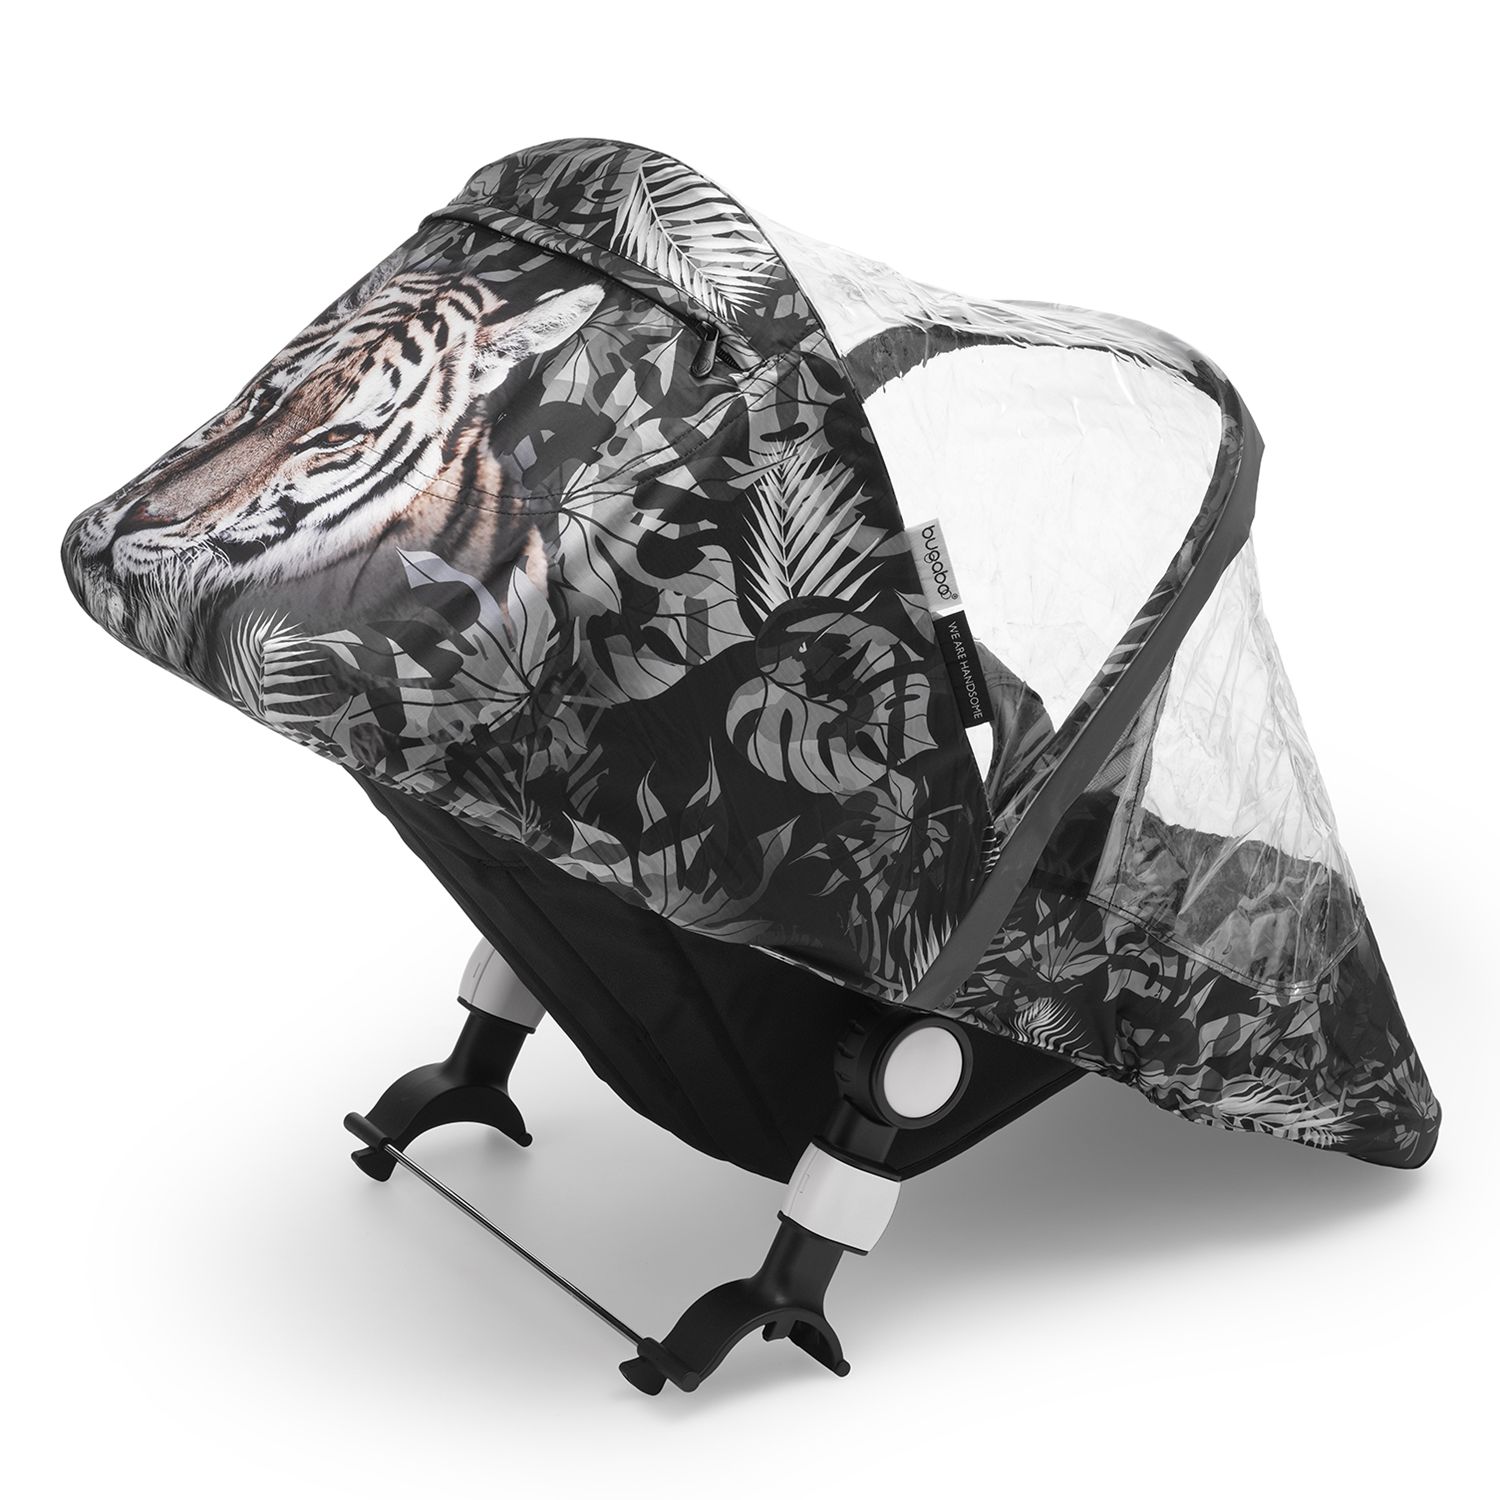 Bugaboo Cameleon Pushchair Raincover, We Are Handsome